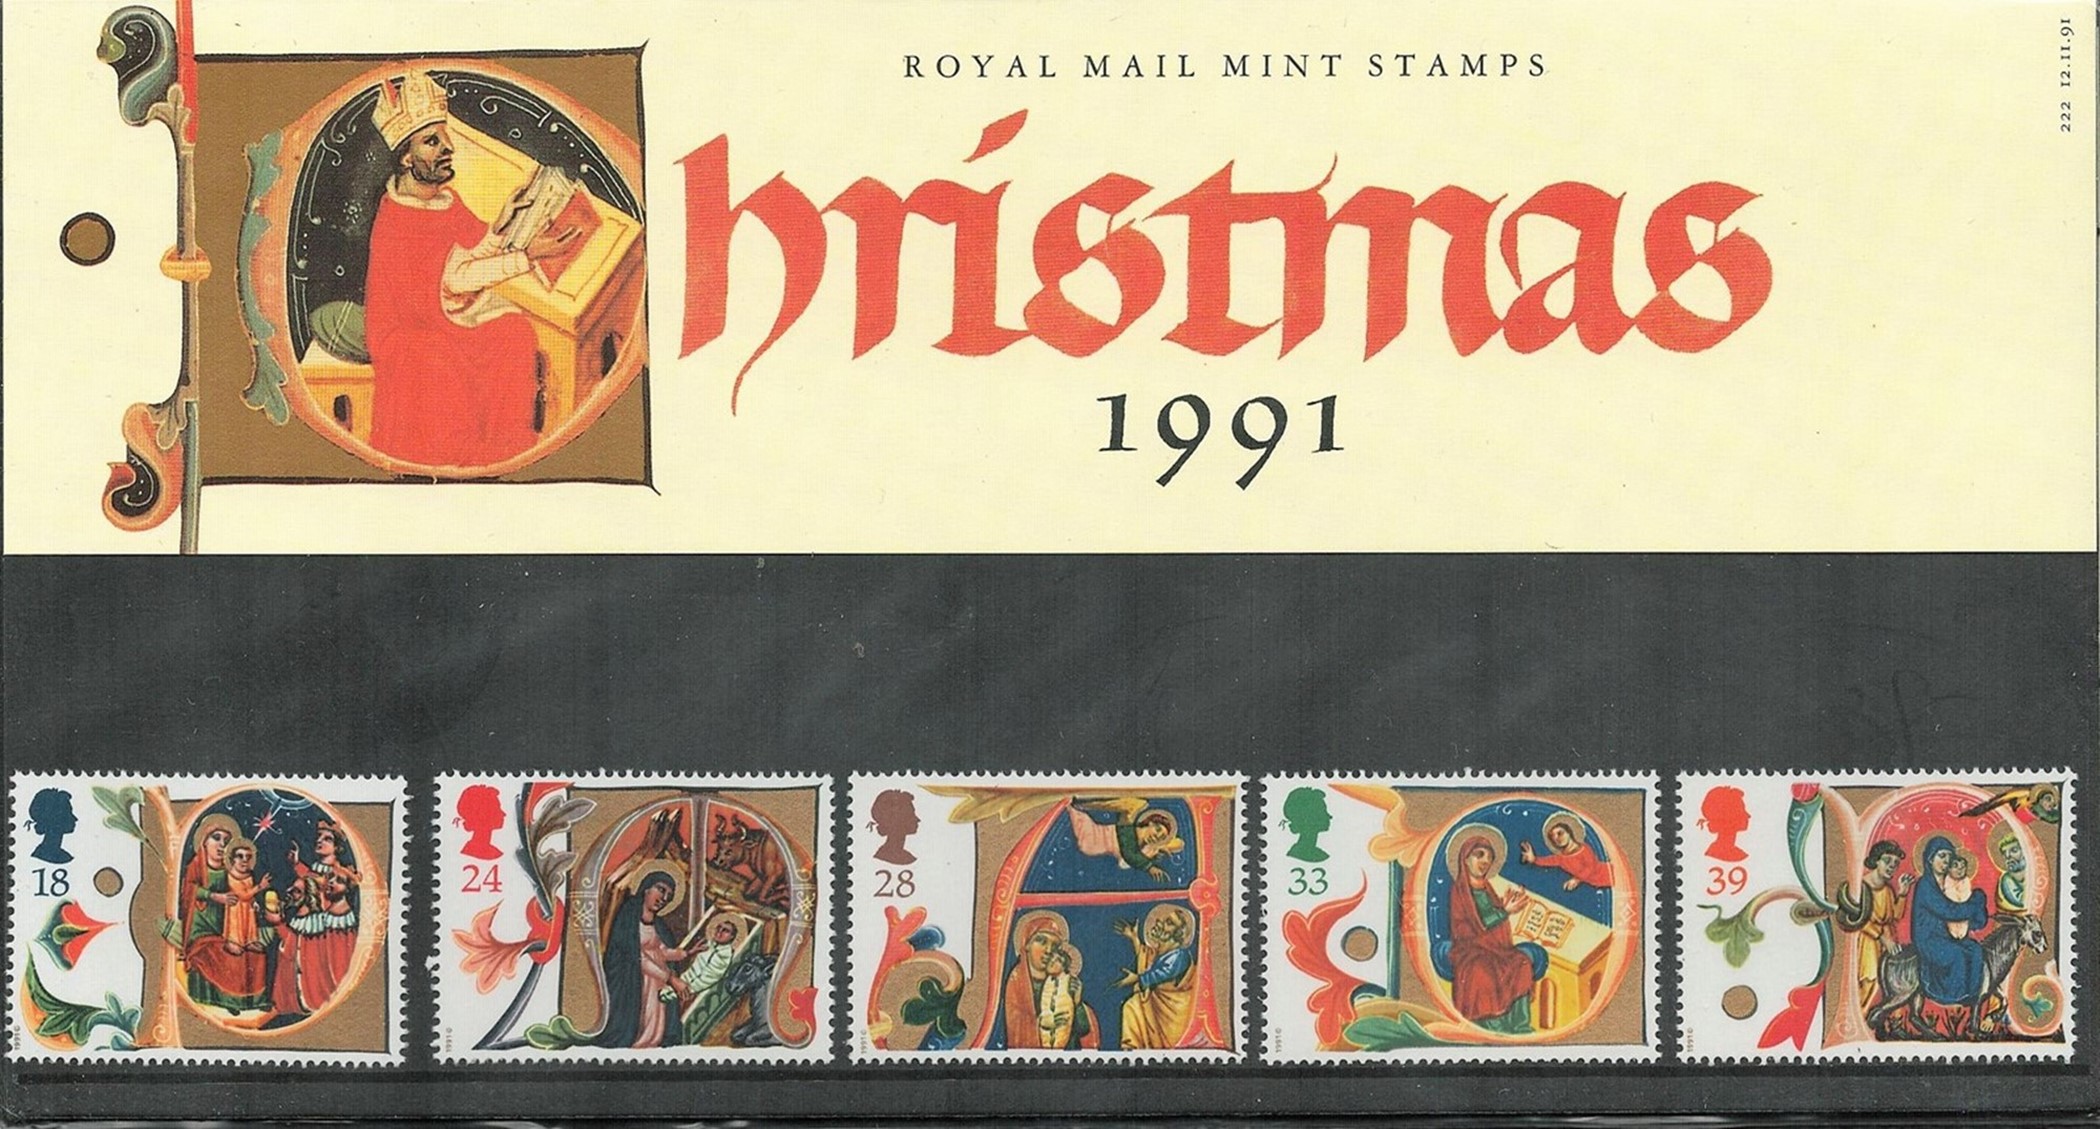 GB Mint Stamps Presentation Pack no 222 Christmas 1991. Good condition. We combine postage on